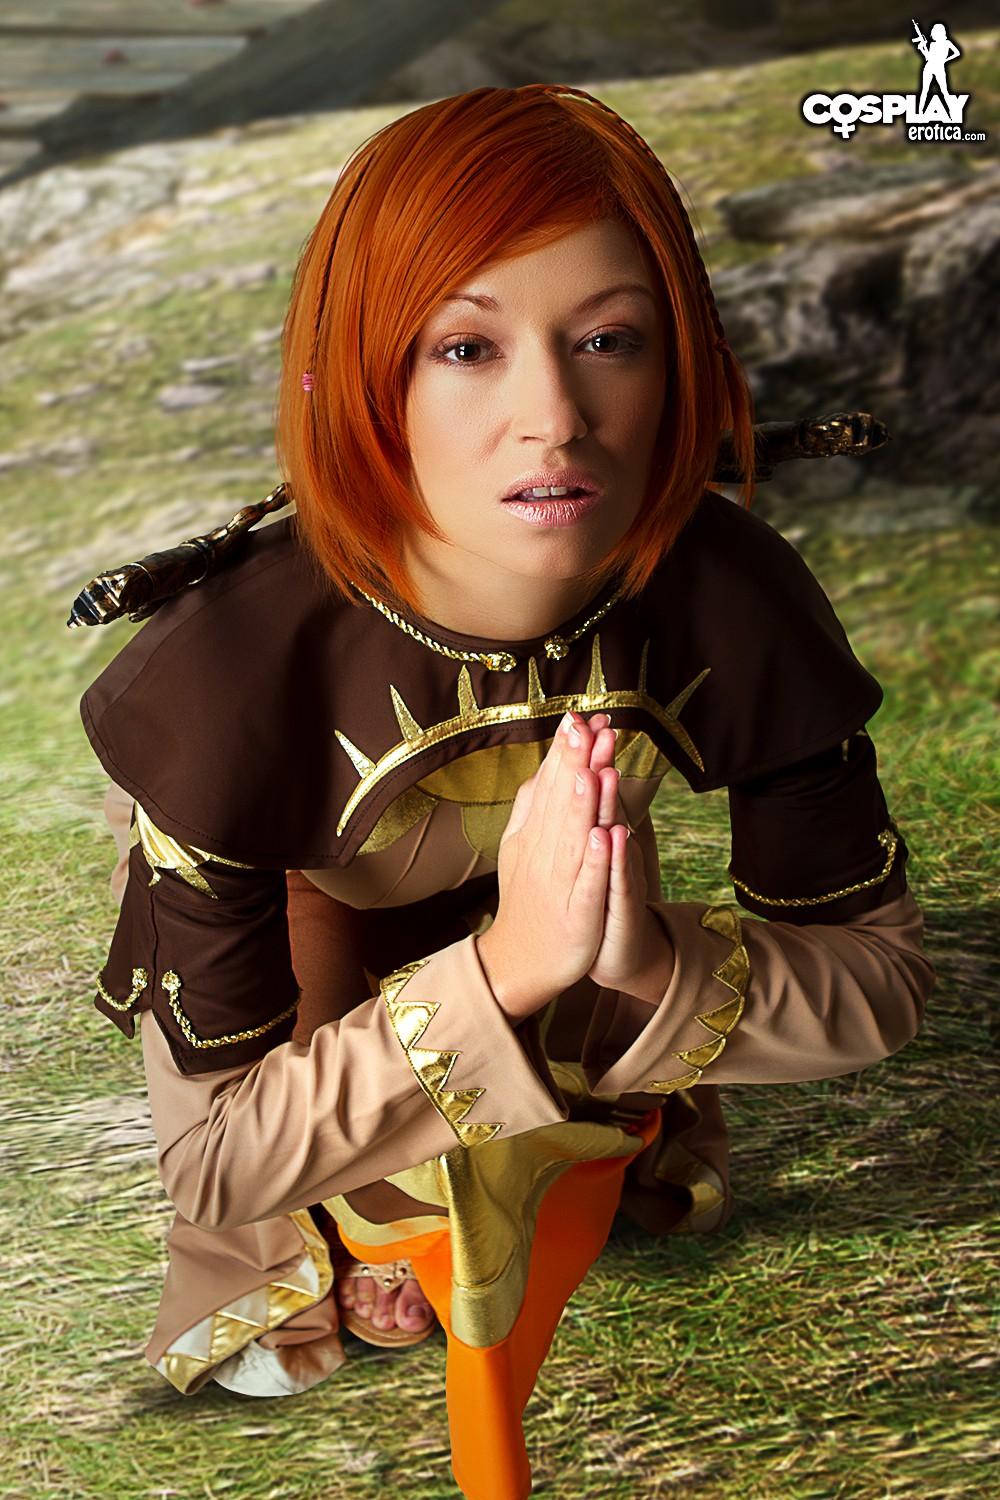 Redhead cosplayer Brownie dresses up as a fantasy character #53563912